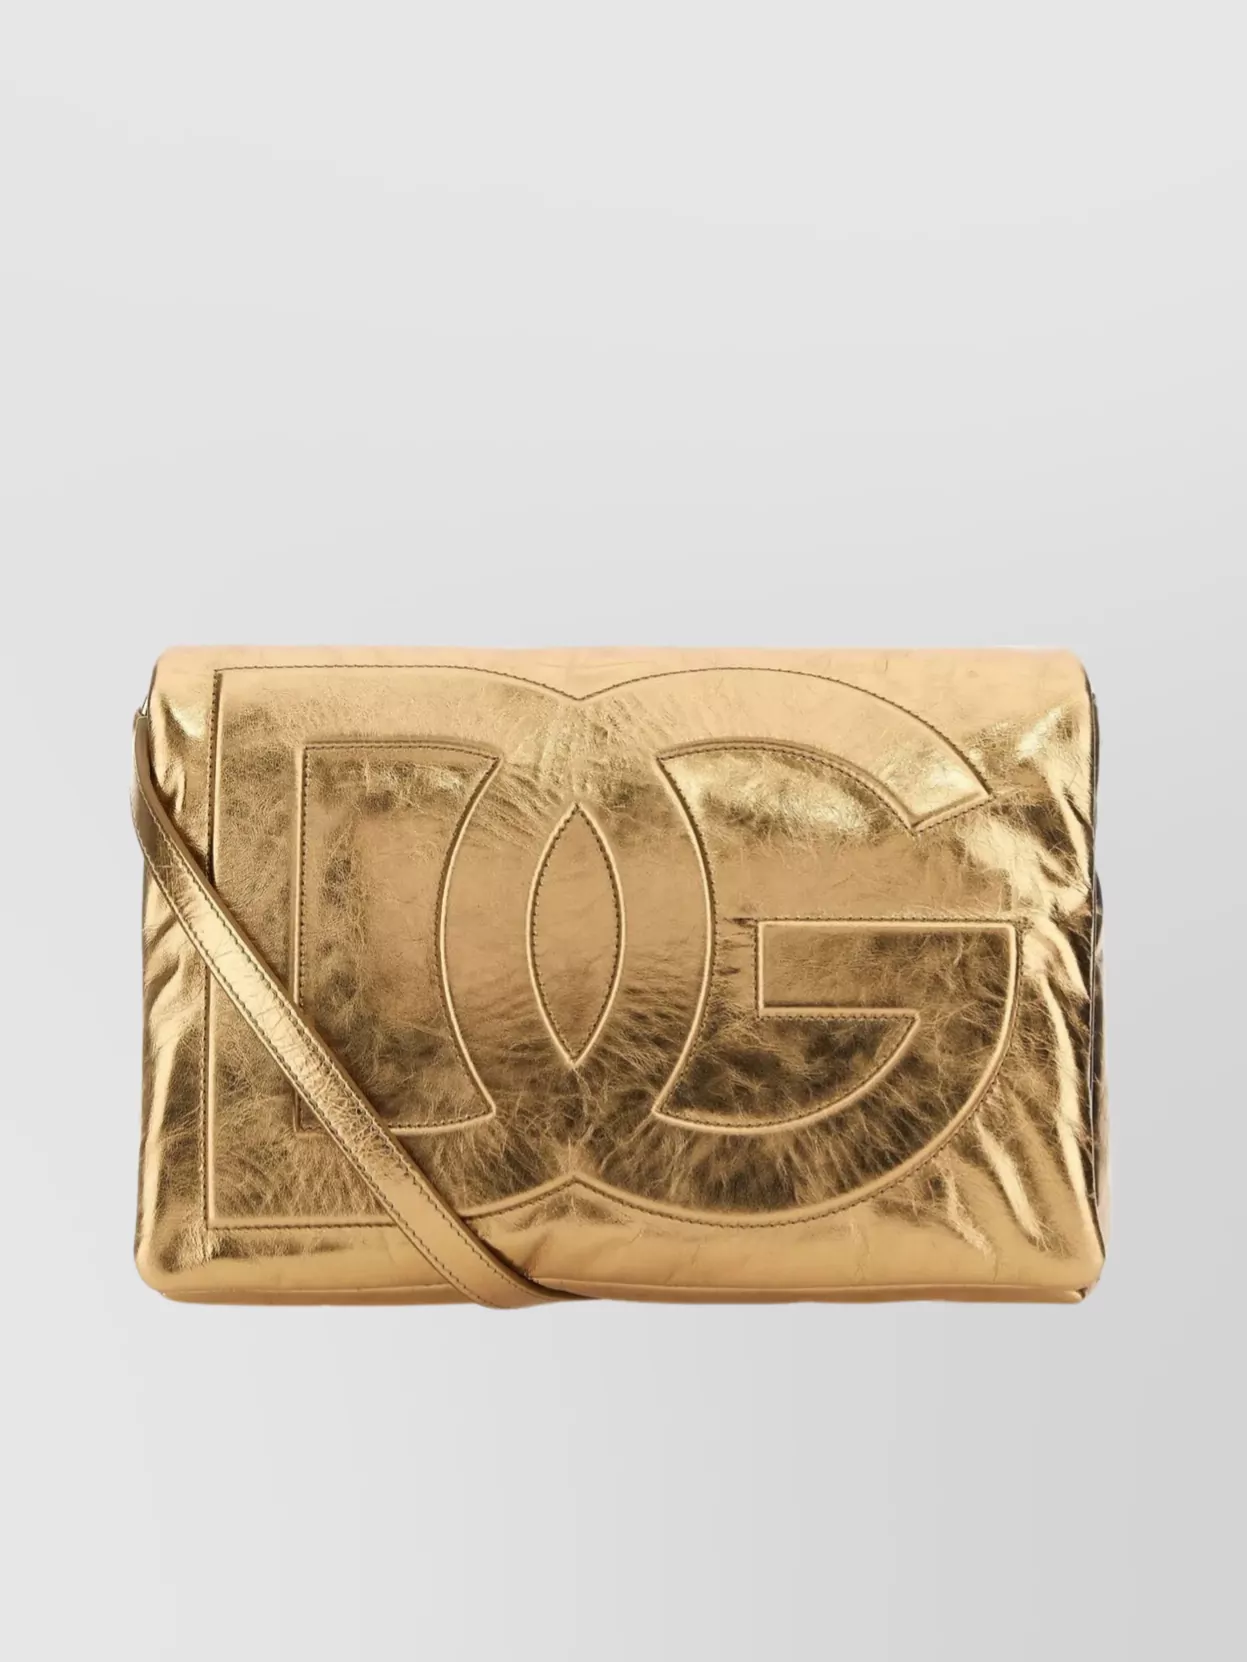 Dolce & Gabbana Logo Clutch With Soft Leather And Metallic Finish In Cream